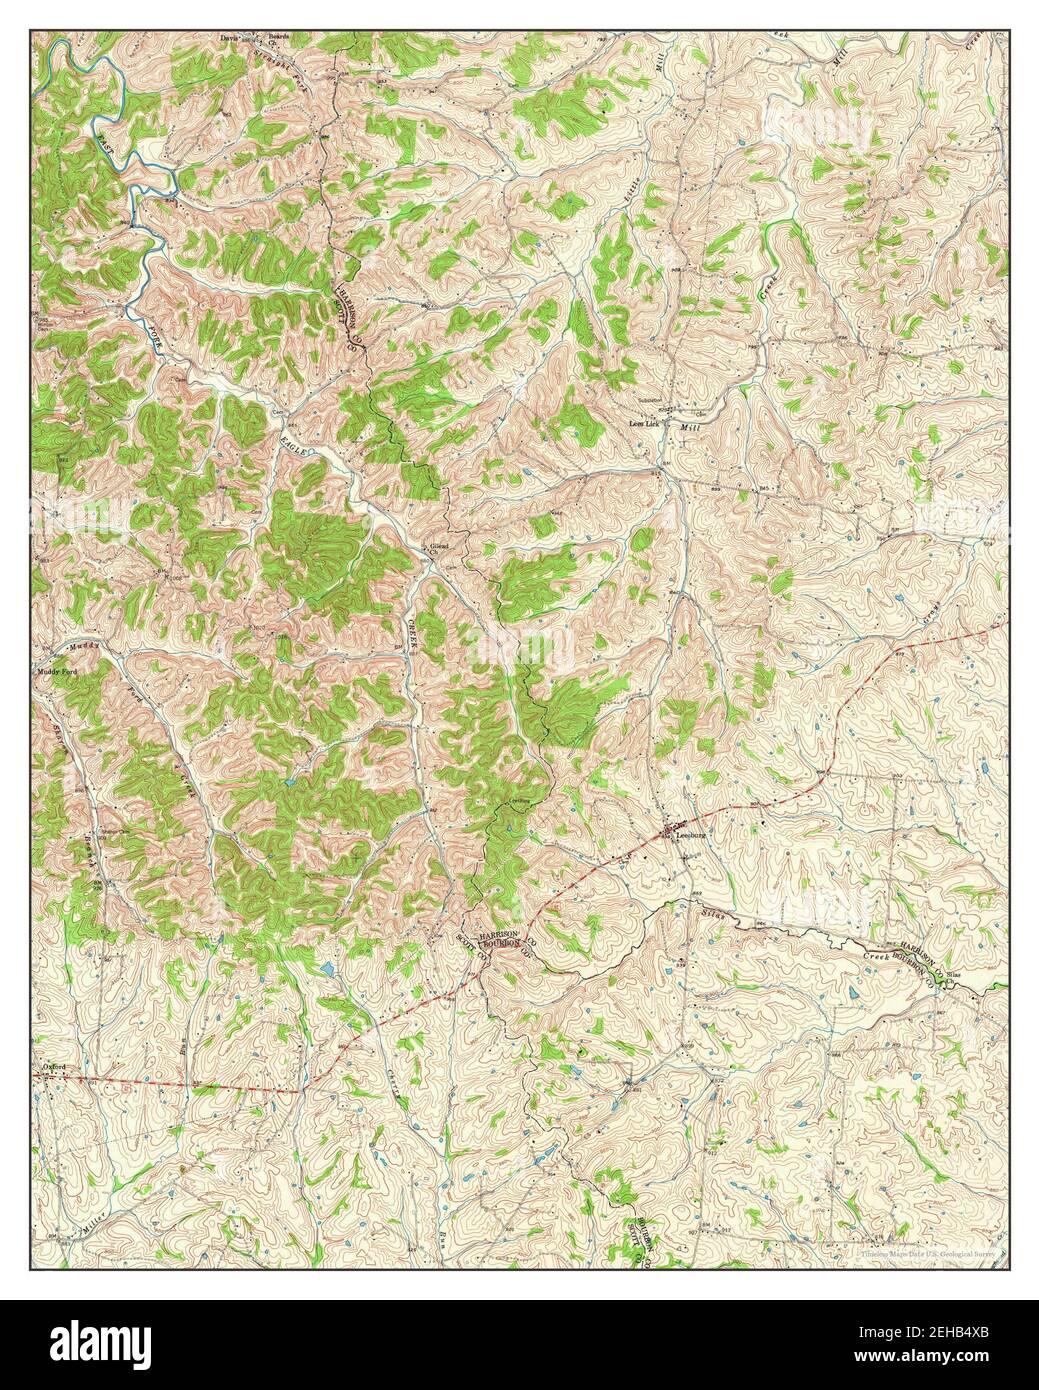 Leesburg, Kentucky, map 1954, 1:24000, United States of America by Timeless Maps, data U.S. Geological Survey Stock Photo